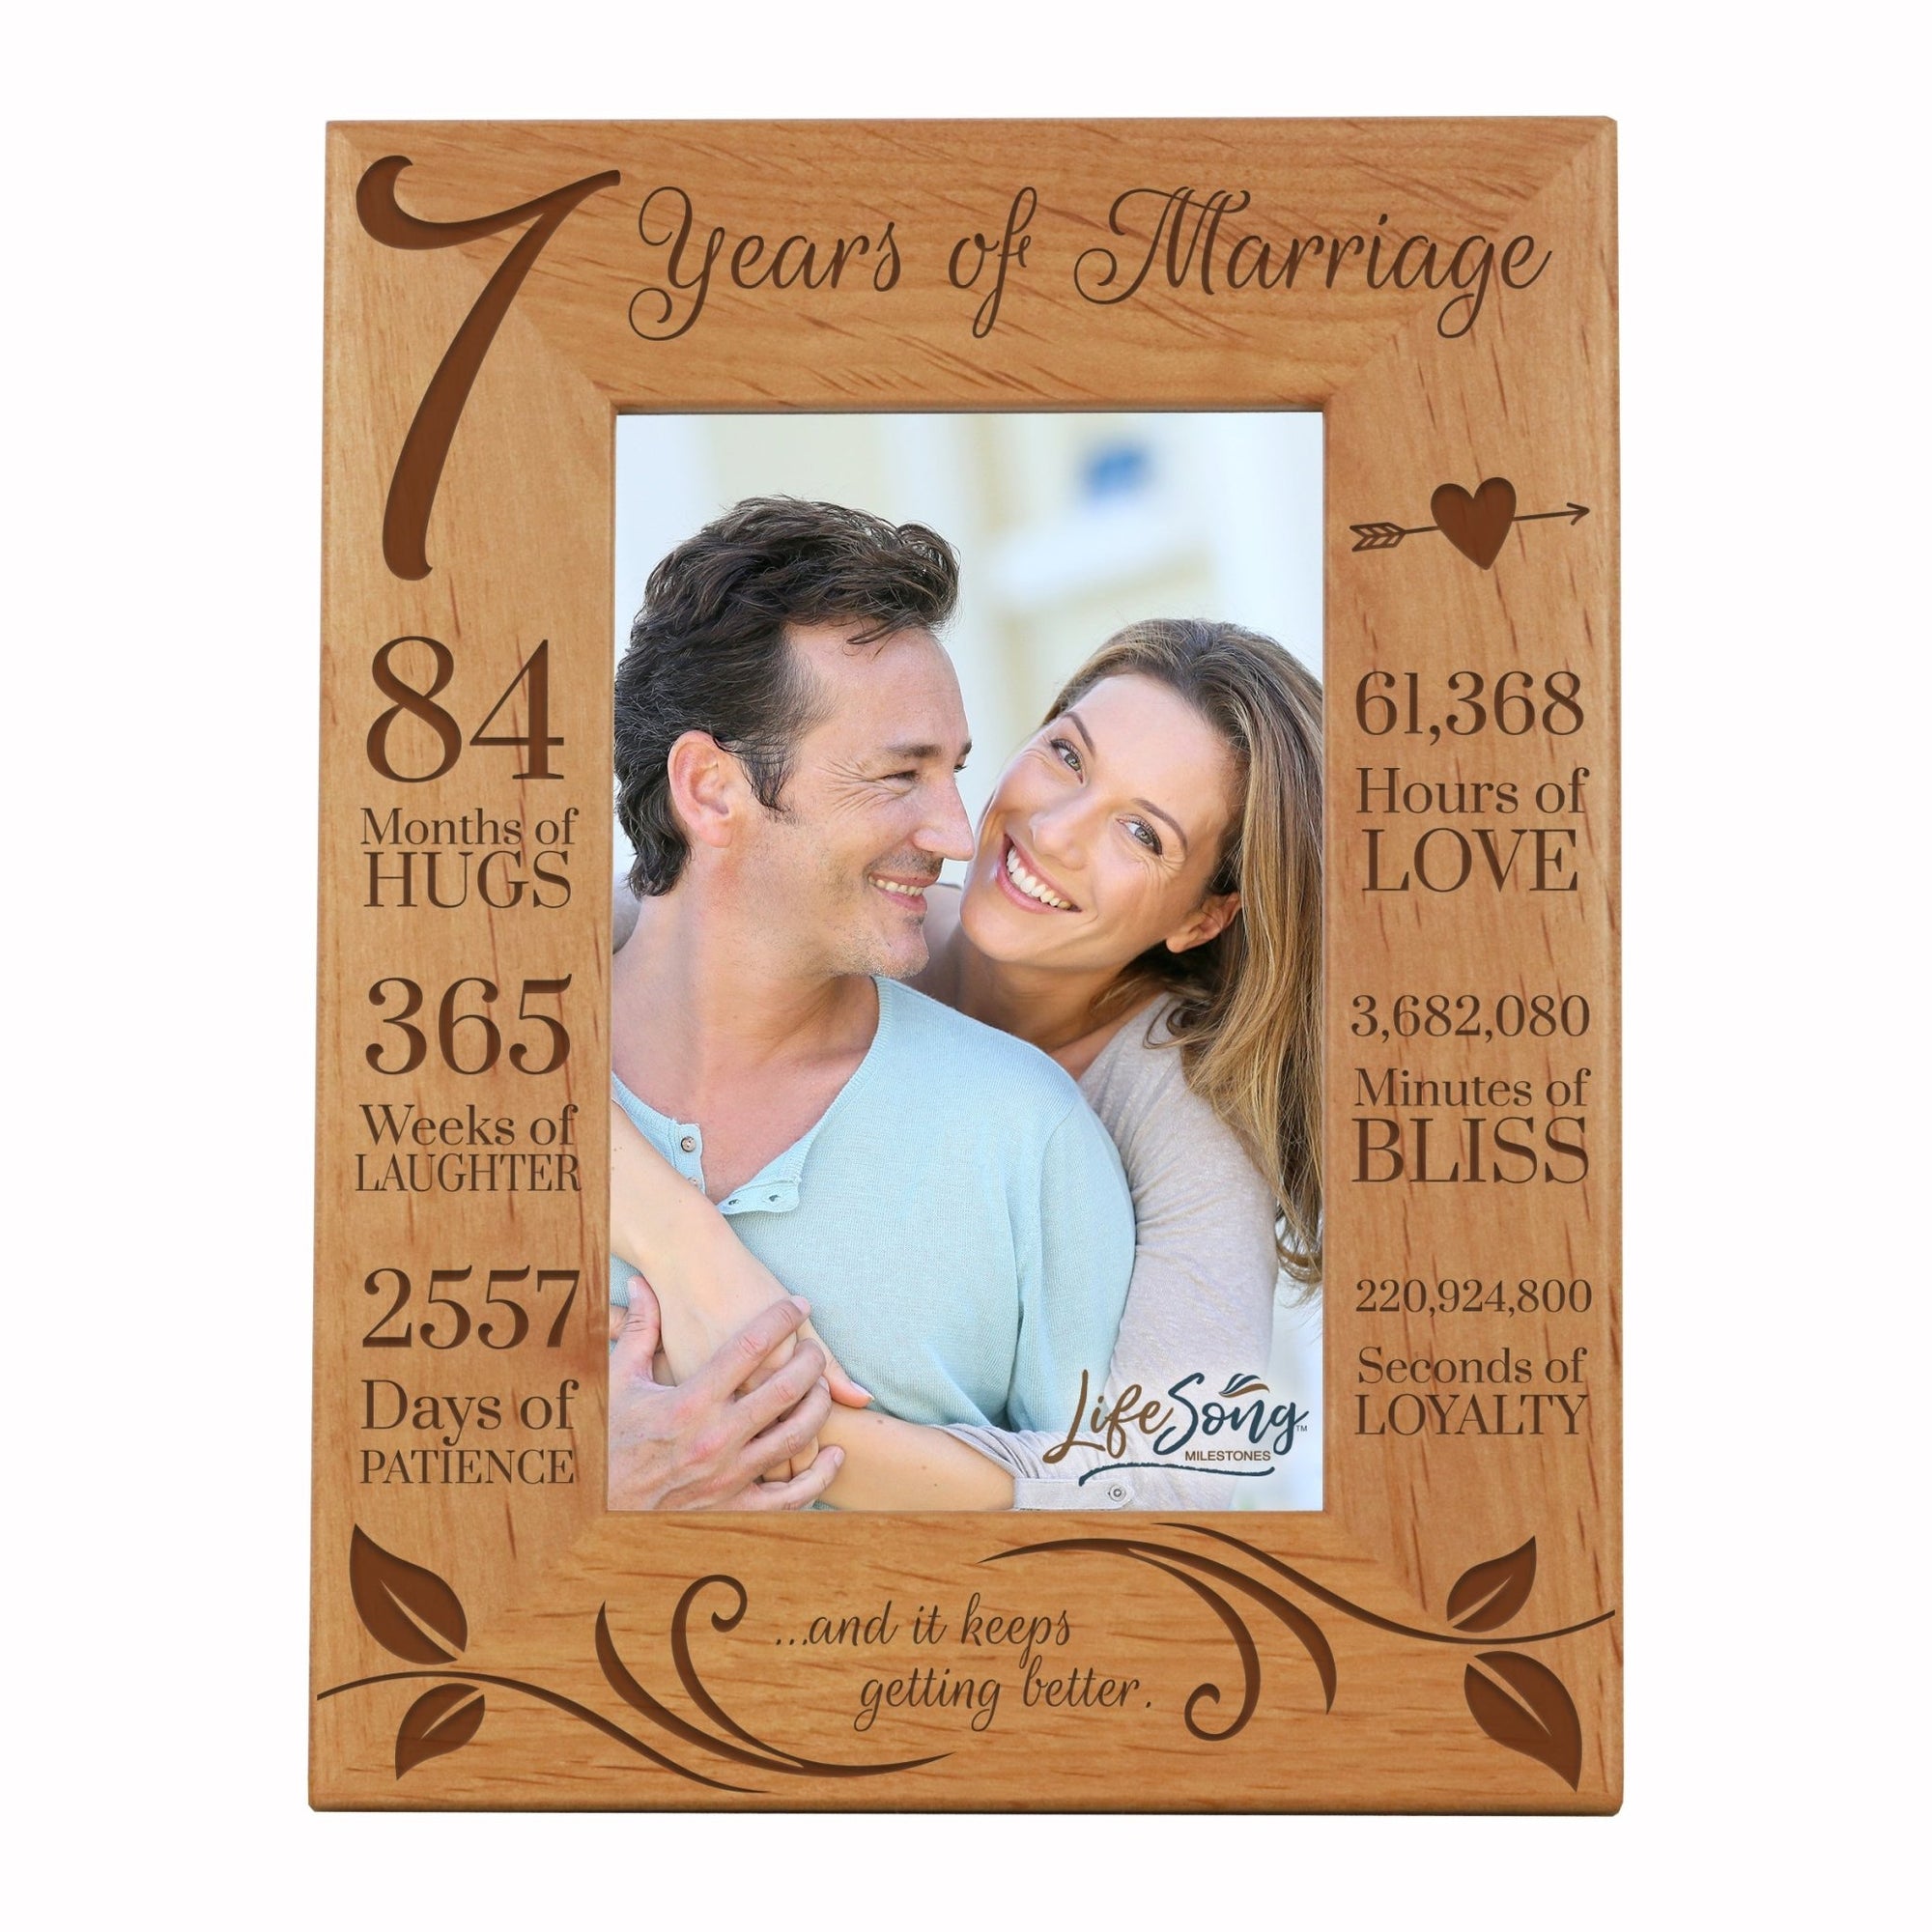 Lifesong Milestones Engraved 7th Wedding Anniversary Photo Frame Wall Decor Gift for Couples